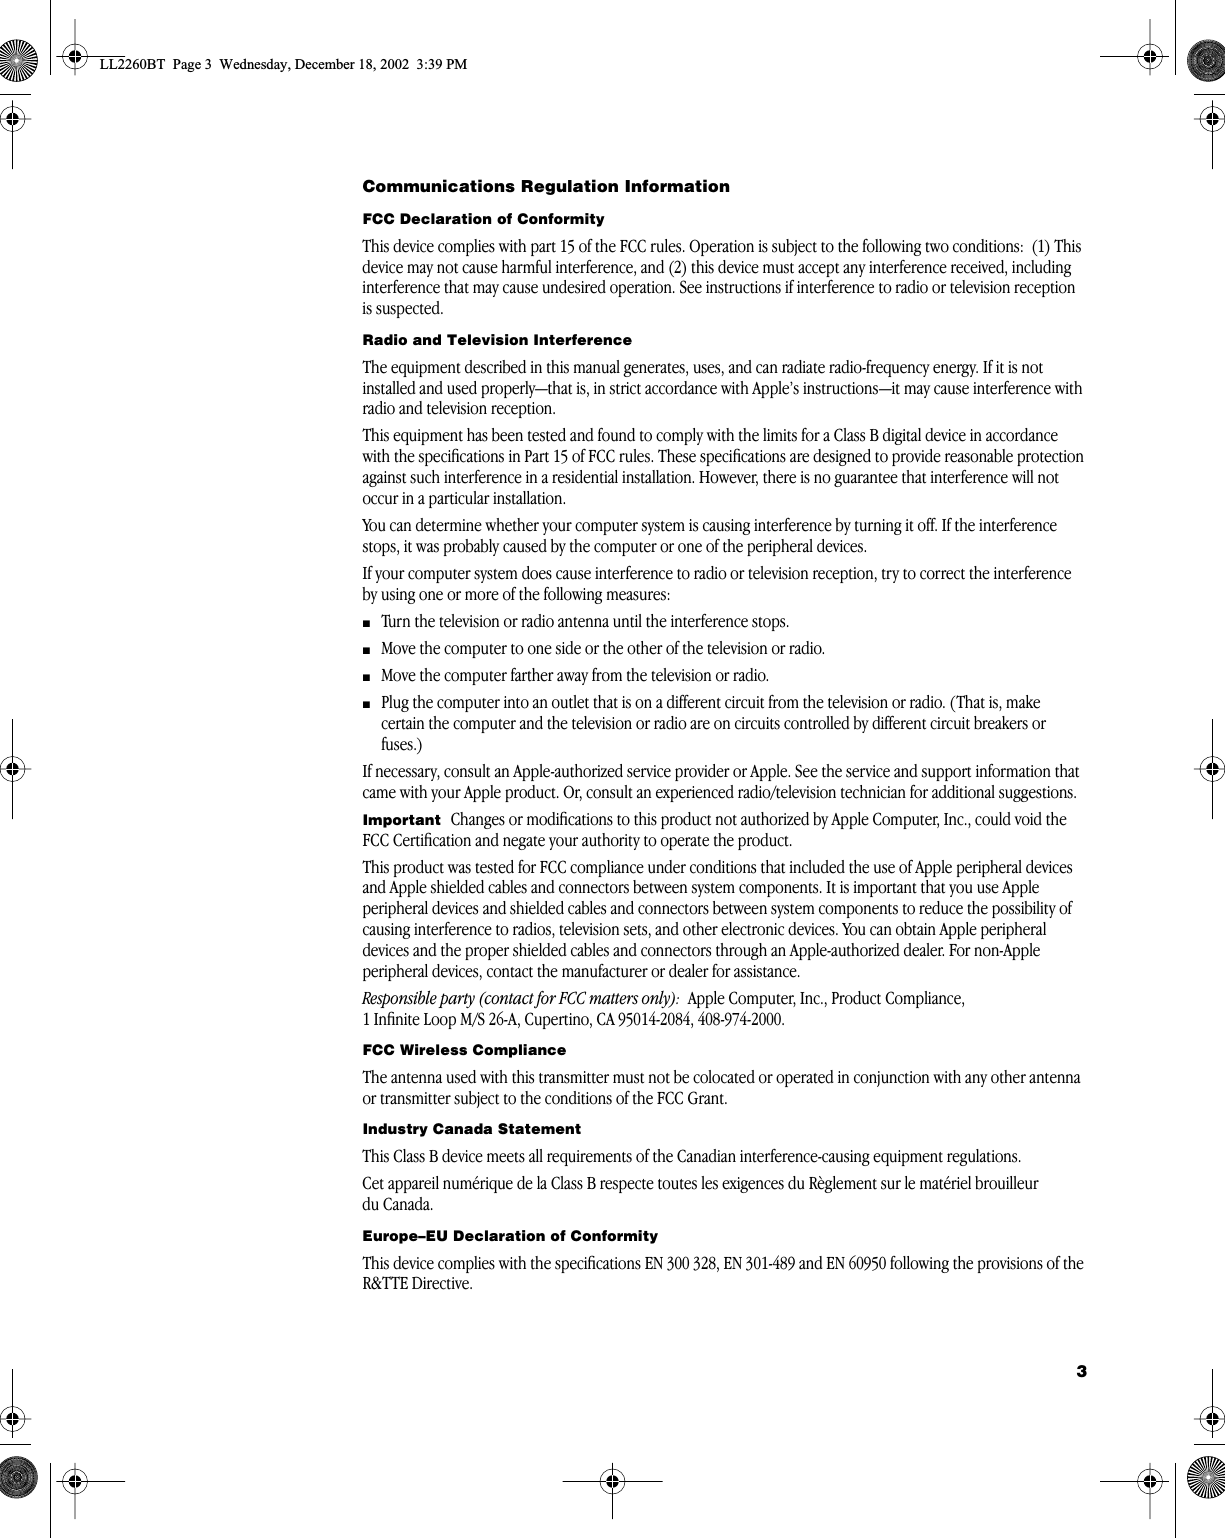 Page 3 of 4 - Apple Bluetooth Manual User